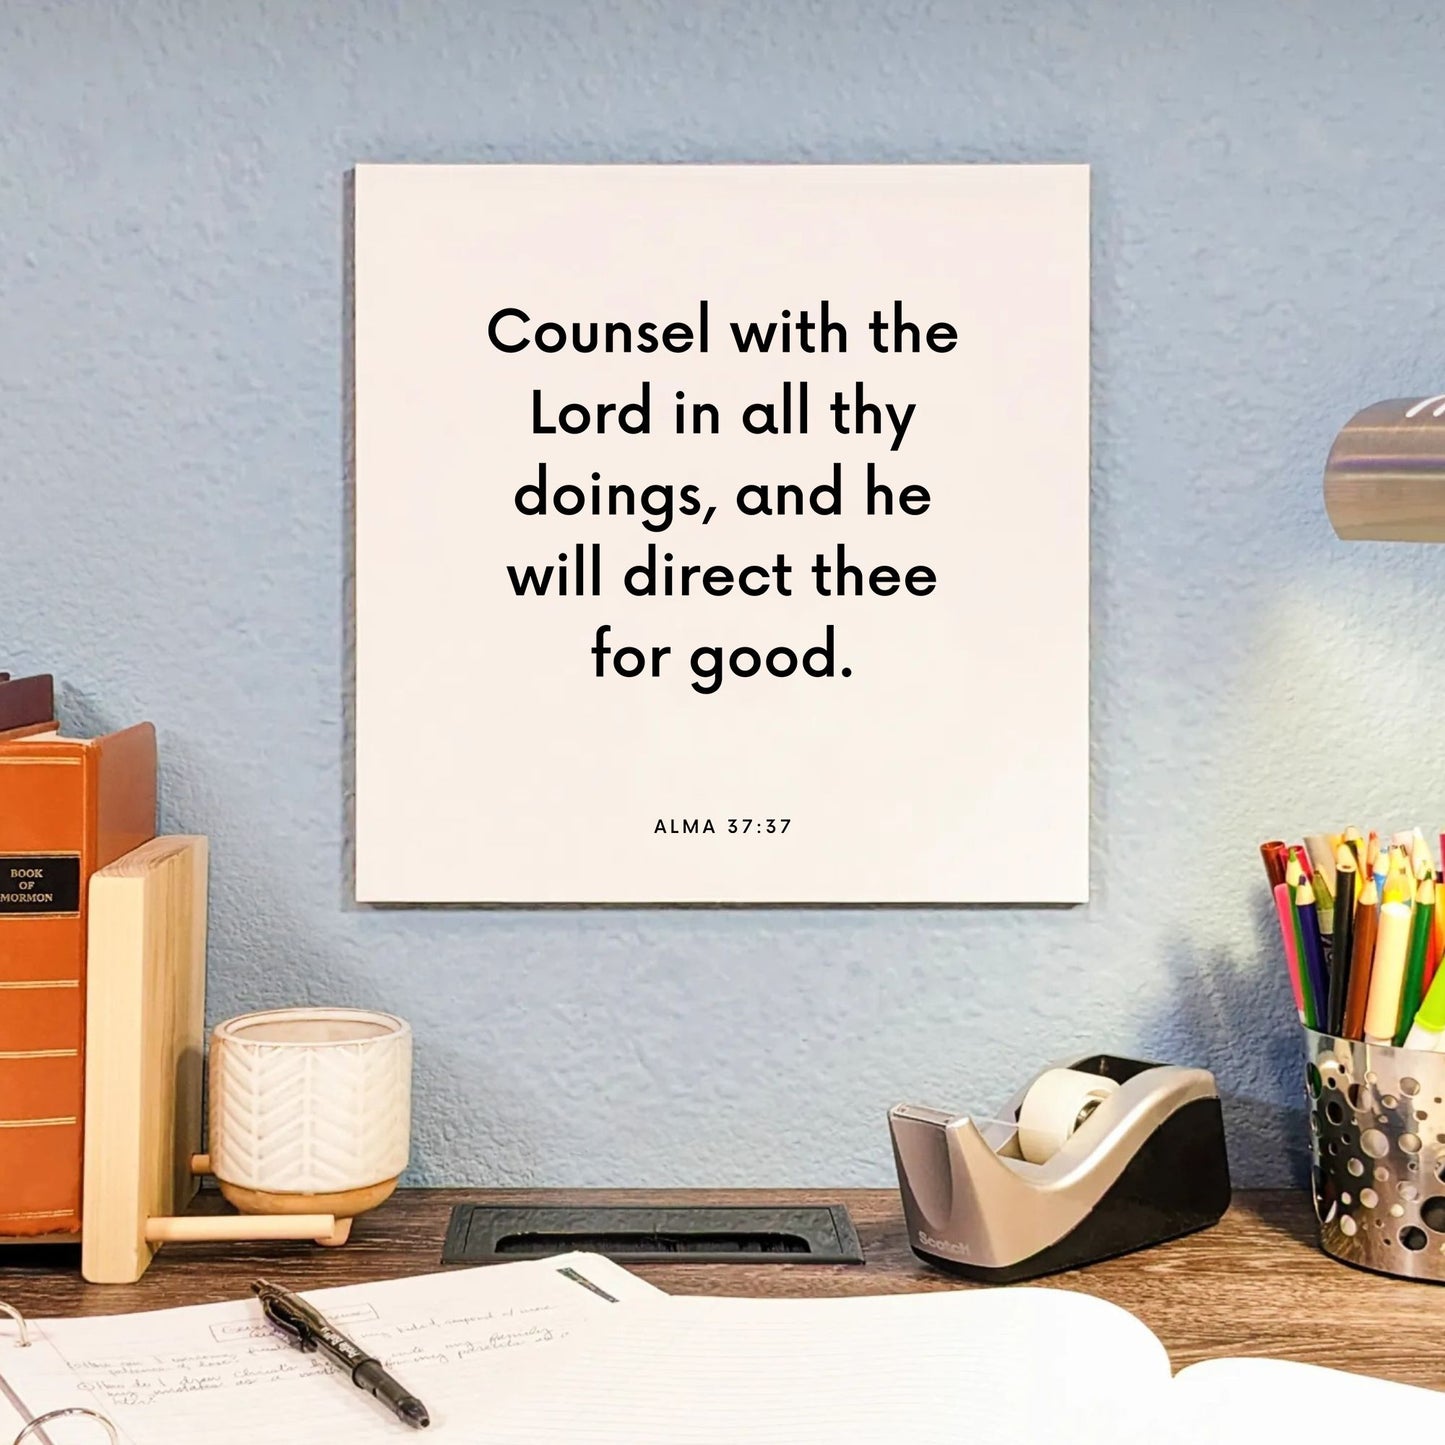 Desk mouting of the scripture tile for Alma 37:37 - "Counsel with the Lord in all thy doings"